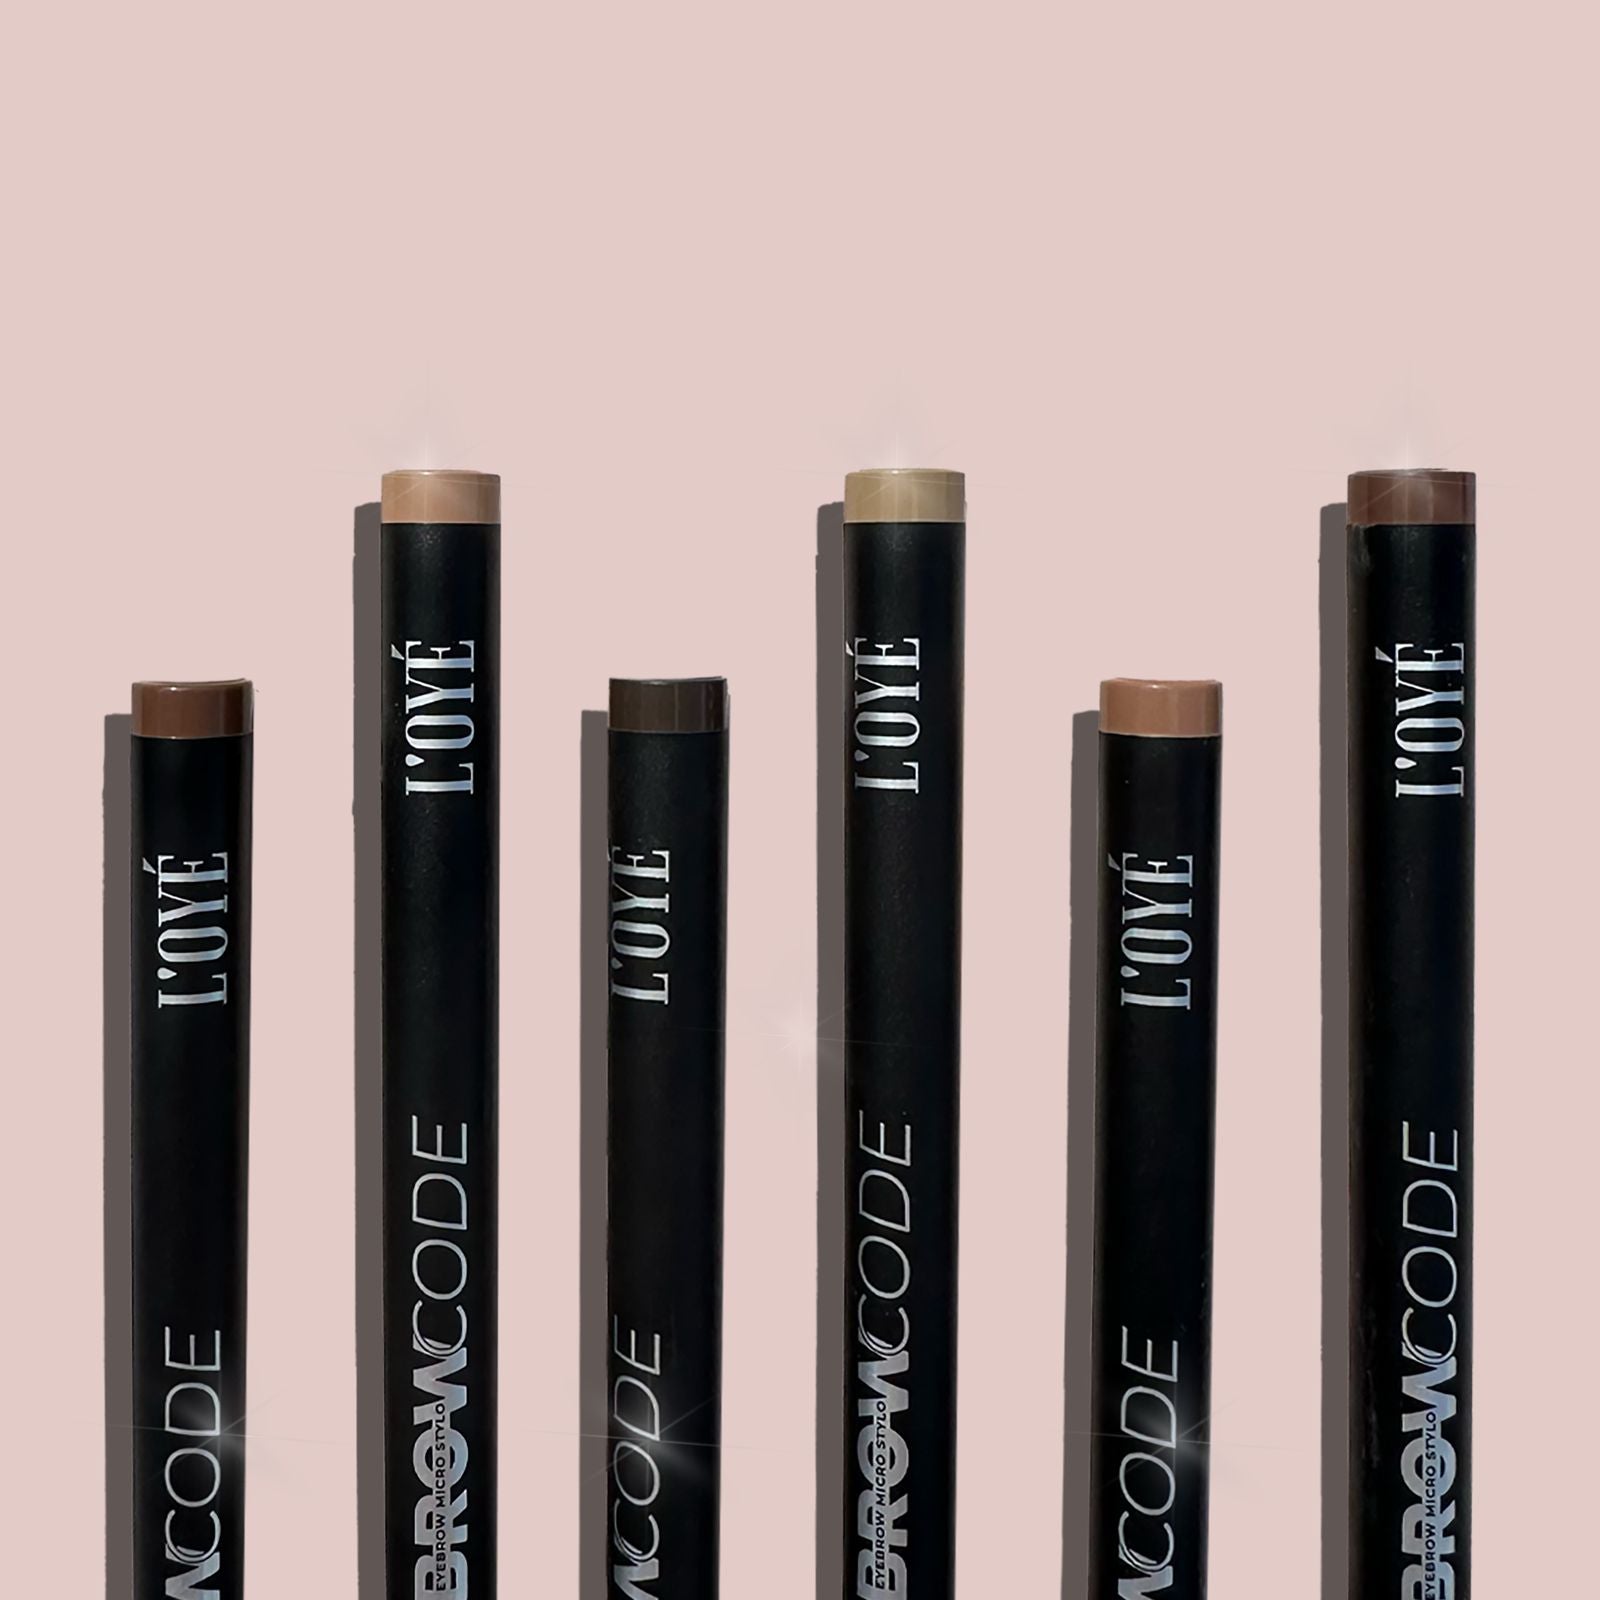 De Browcode: Because perfect brows always come first